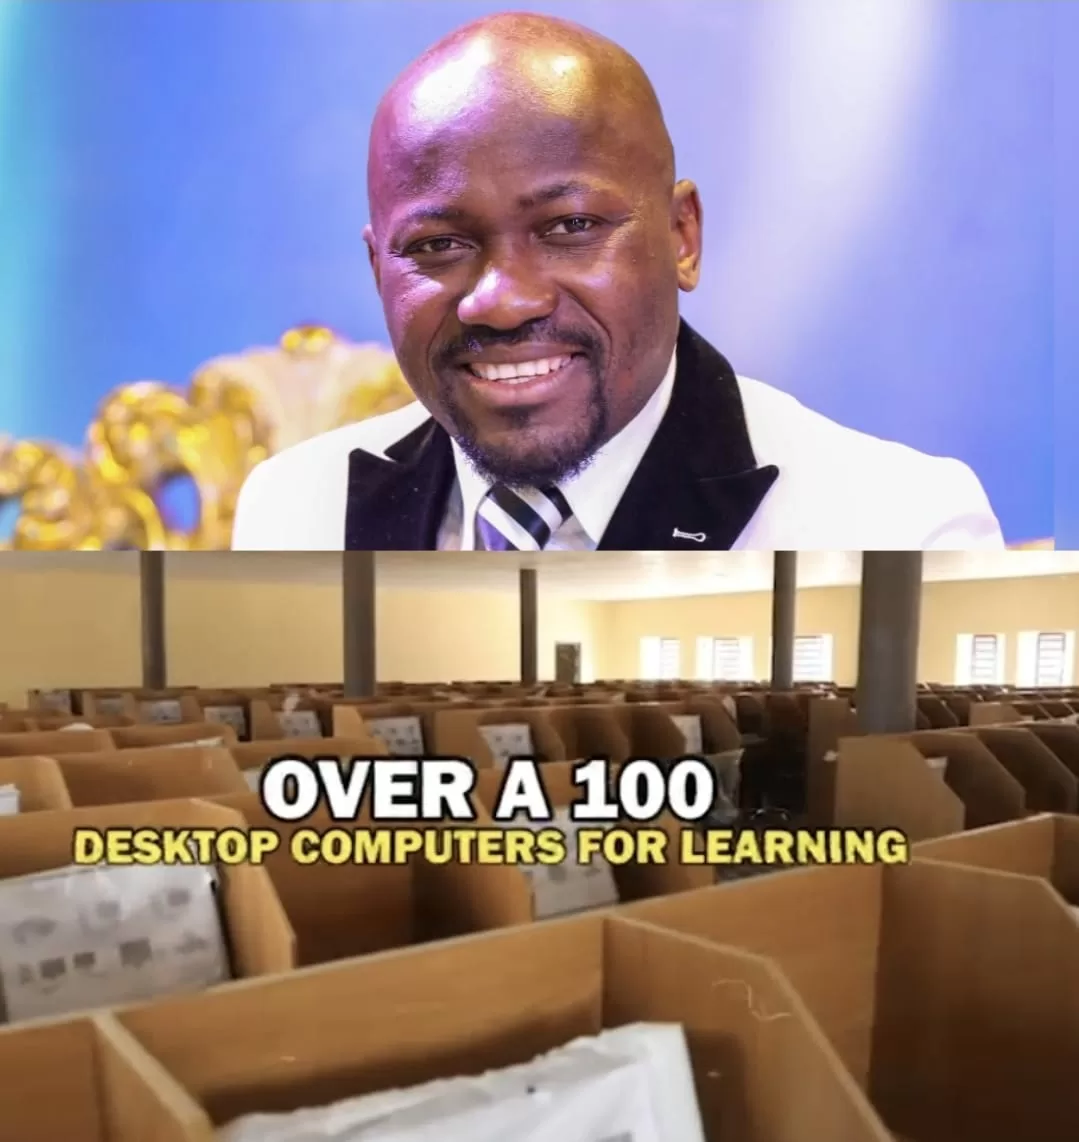 Apostle Johnson Suleman's generous donation boosts technological resources at Auchi Polytechnic with 250 million Naira ICT Centre as OFM celebrate 20th Anniversary